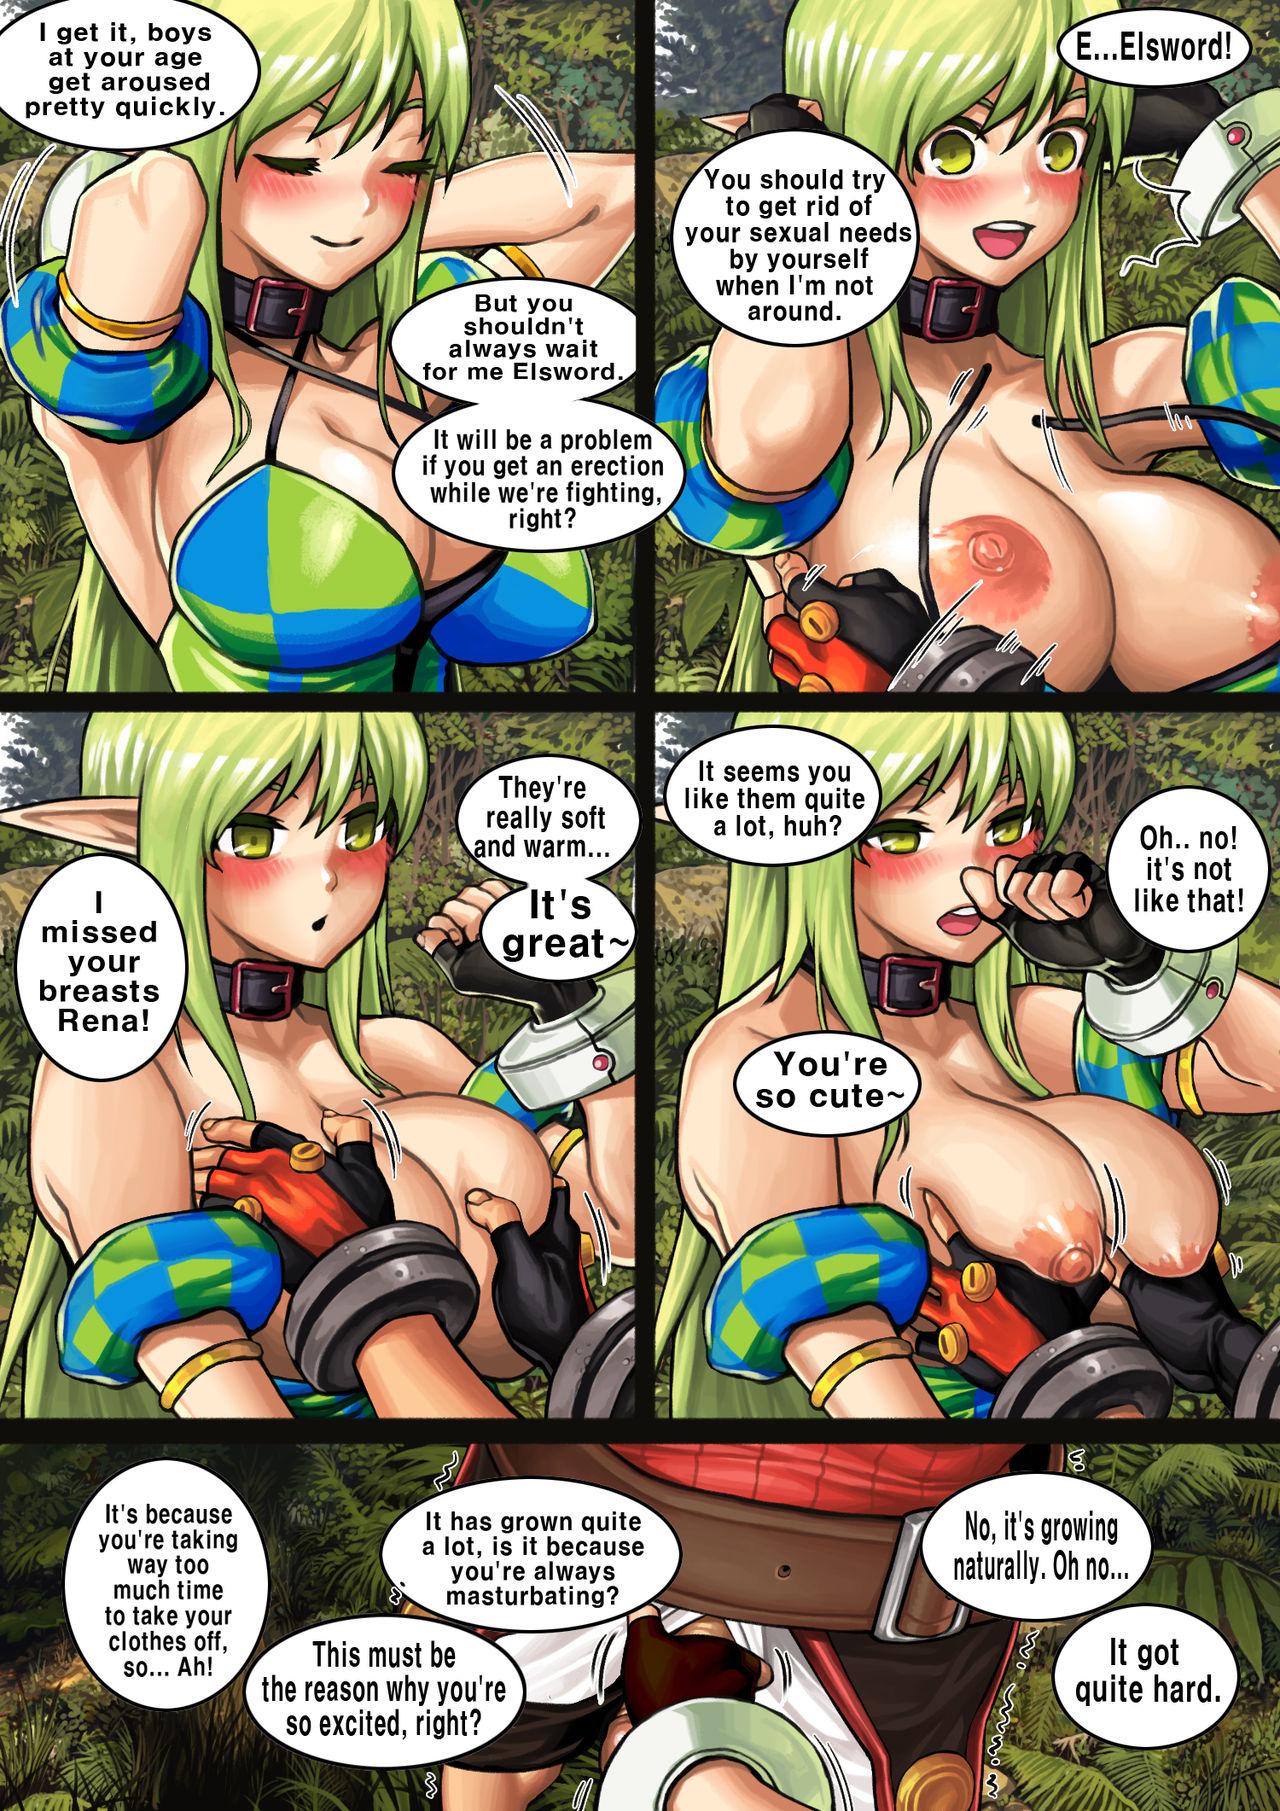 Desperate Voluptuous Reward - Elsword Ass To Mouth - Page 2